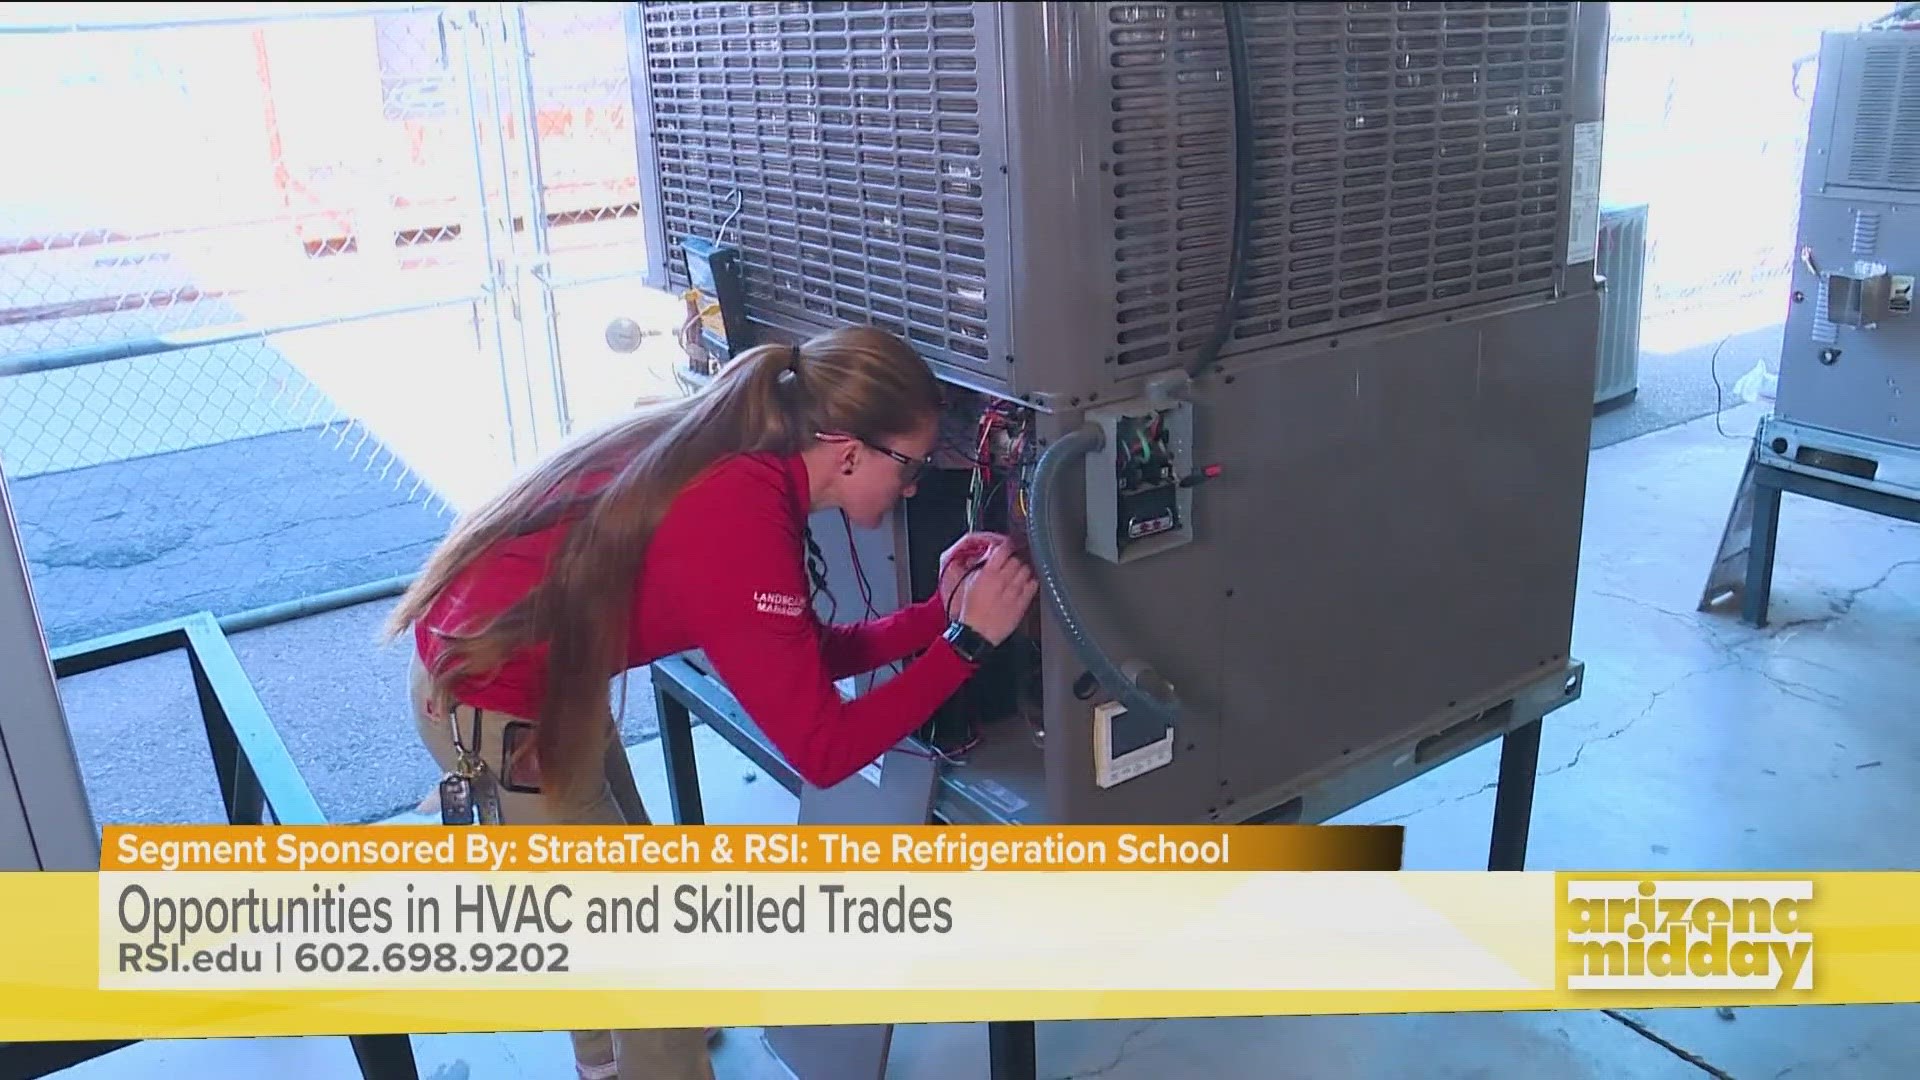 We headed out to the RSI: The Refrigeration School to get the lowdown on training for an HVAC career and the opportunities available.